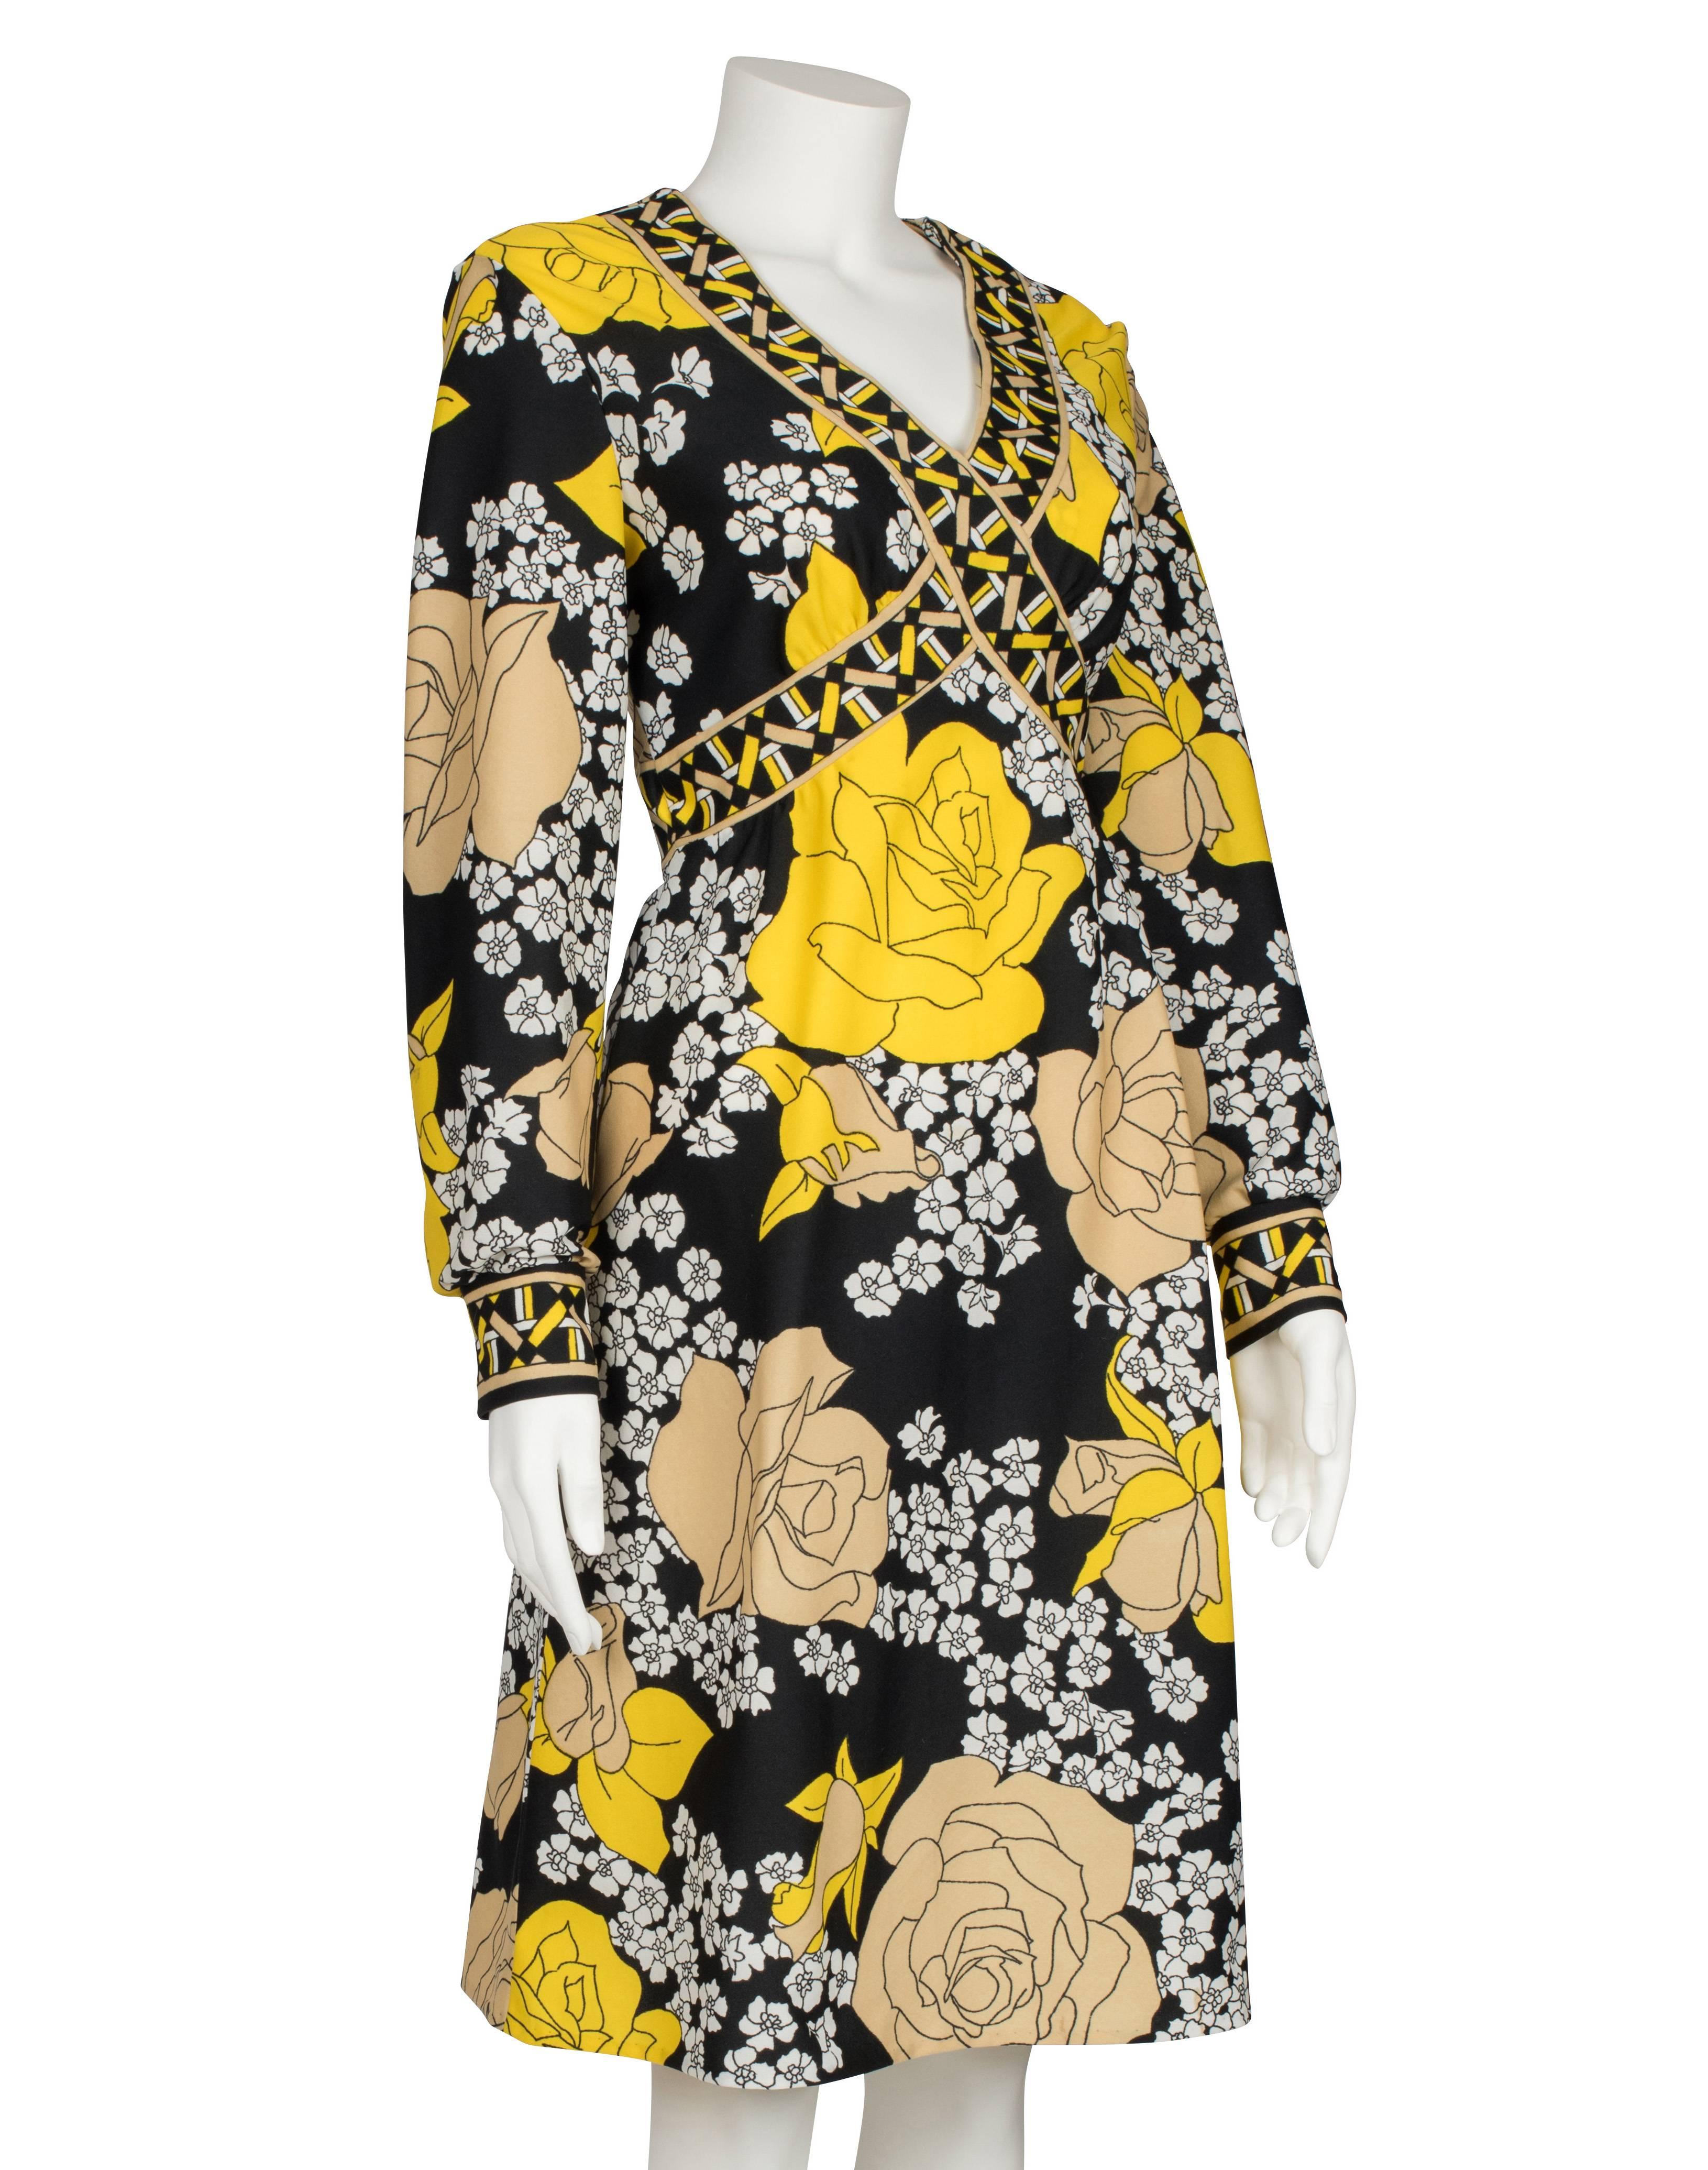 1970's Yellow & Black Floral Dress with Geometric Frieze In Excellent Condition For Sale In London, GB